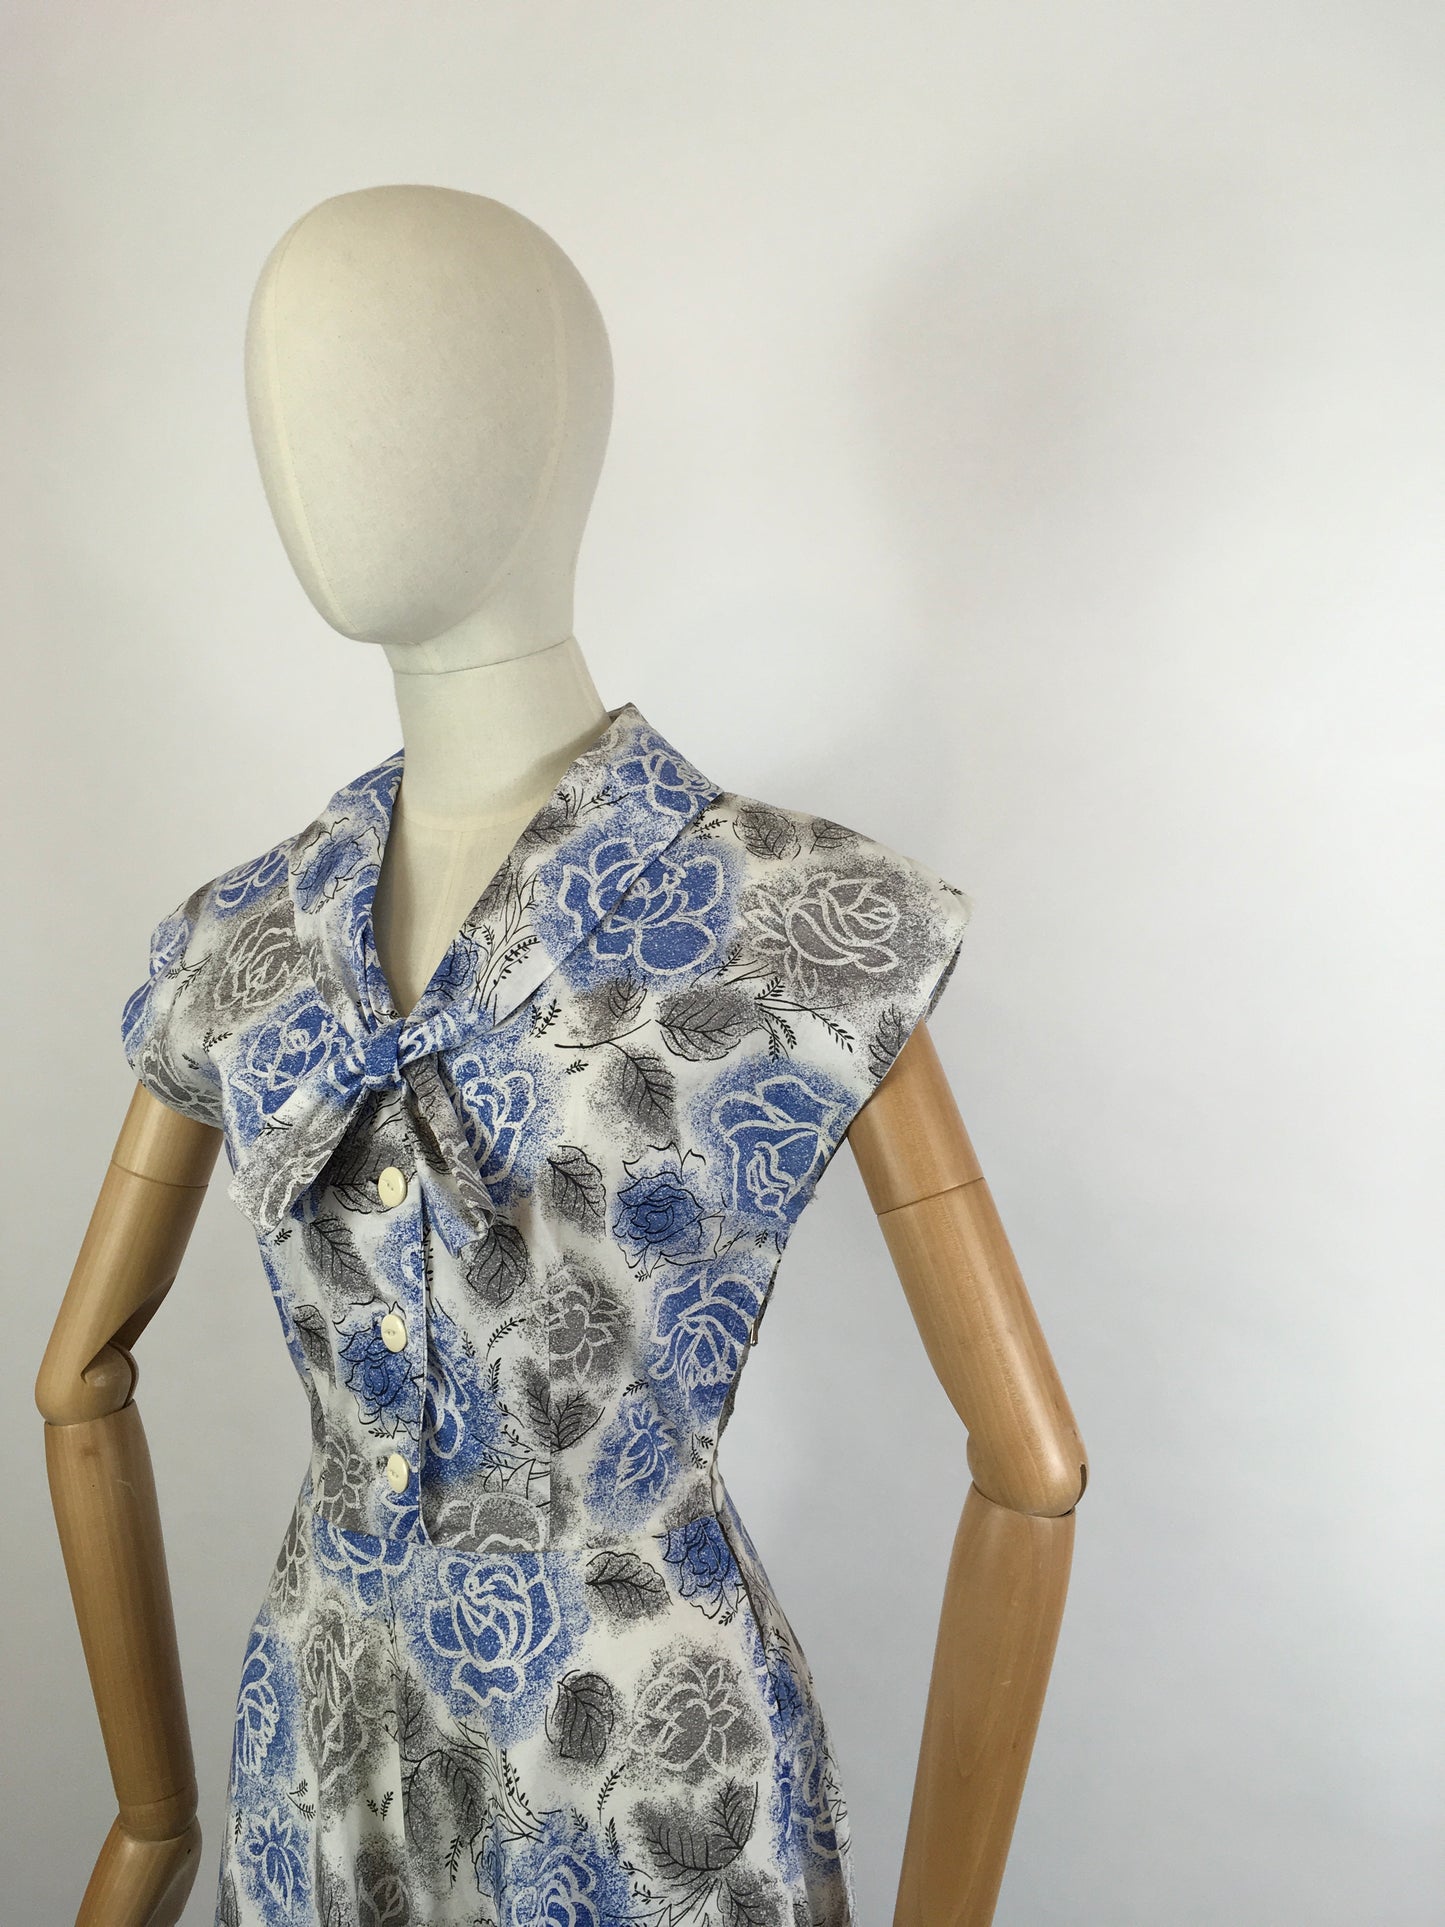 Original late 1940s Floral Dress - In A Crisp Cotton in Soft Greys, Charcoals and Blues